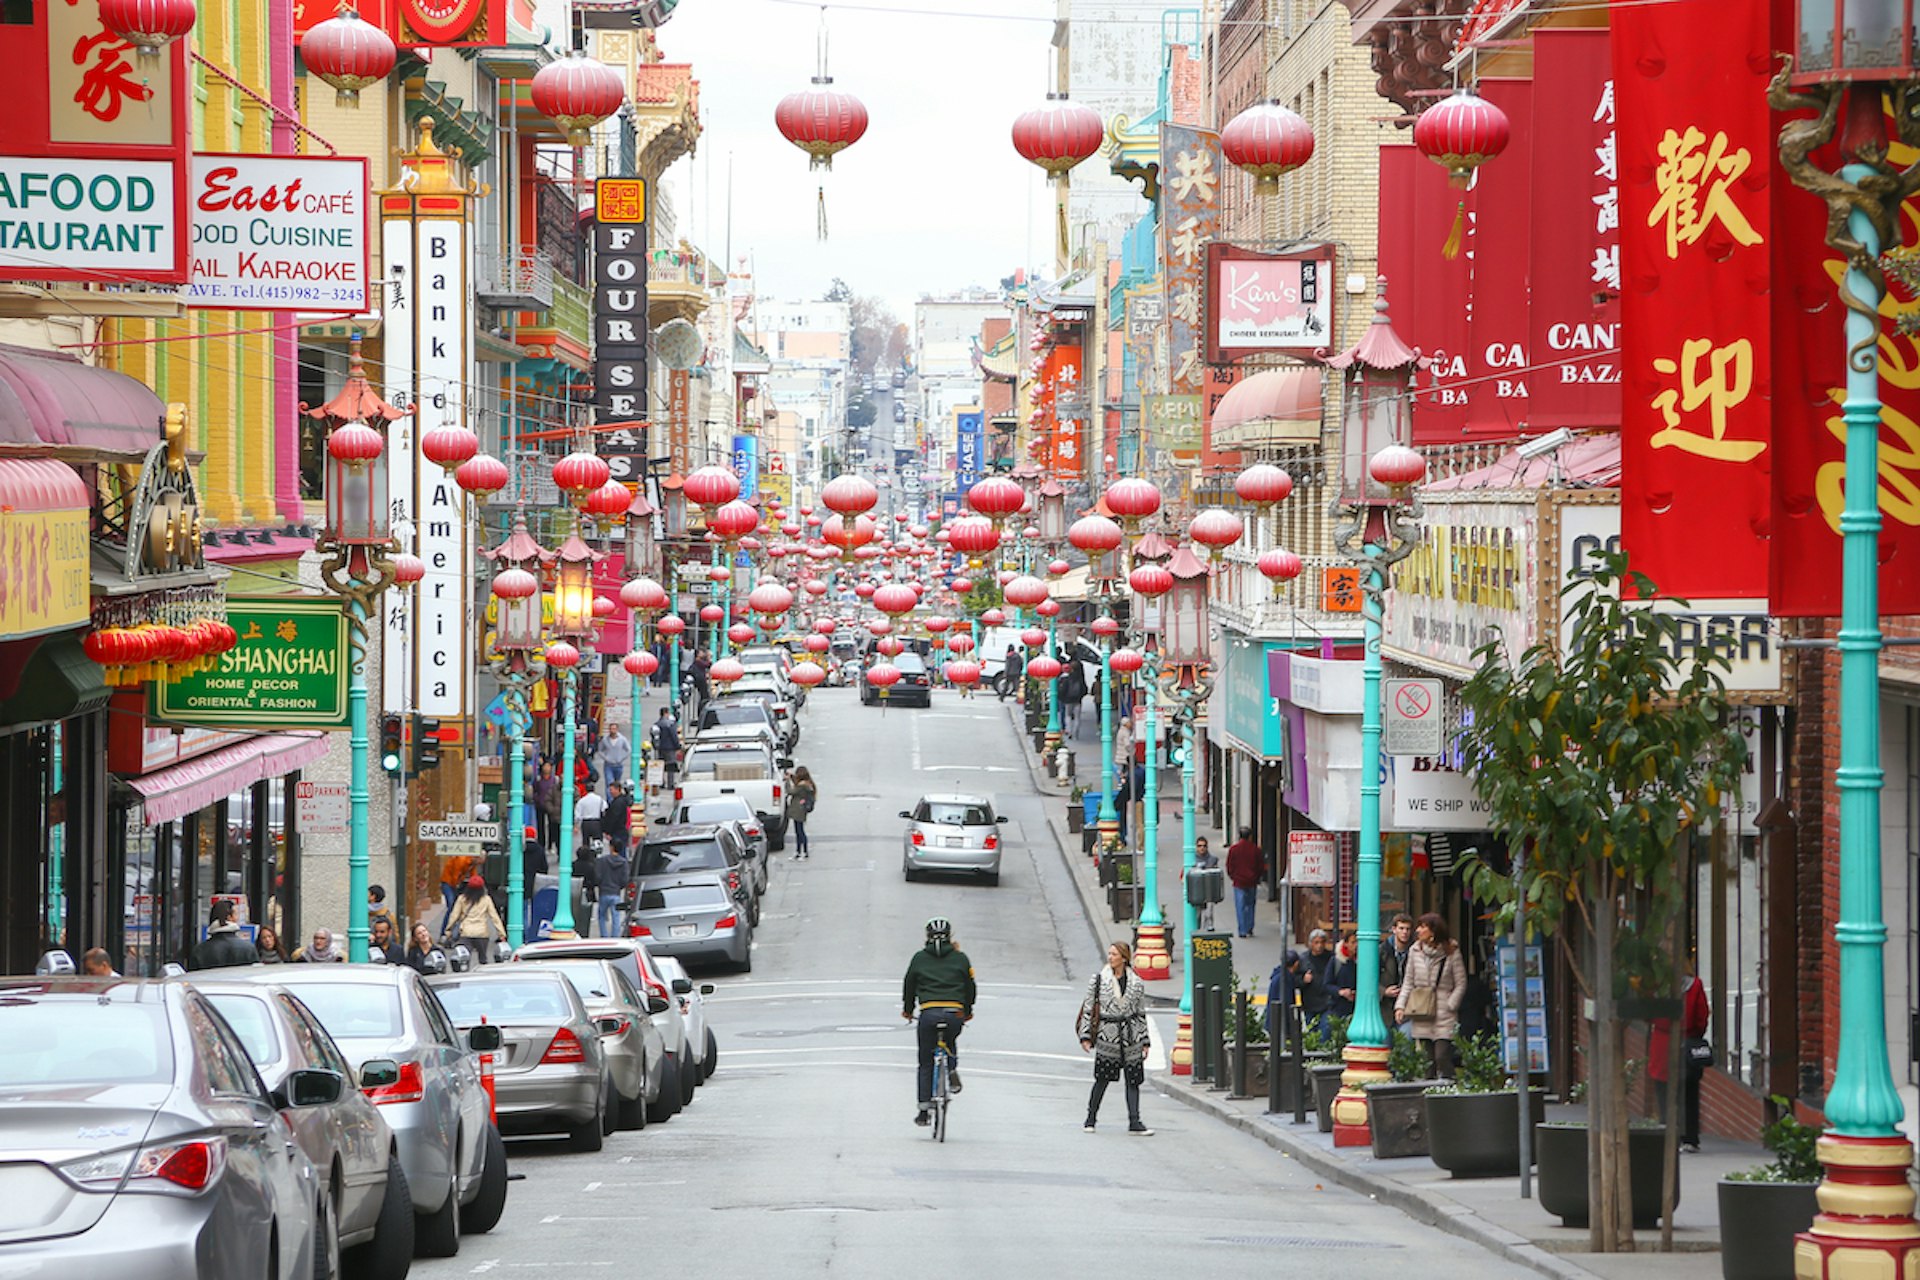 A man bicycles down Grant St in Chinatown, San Francisco, California, USA